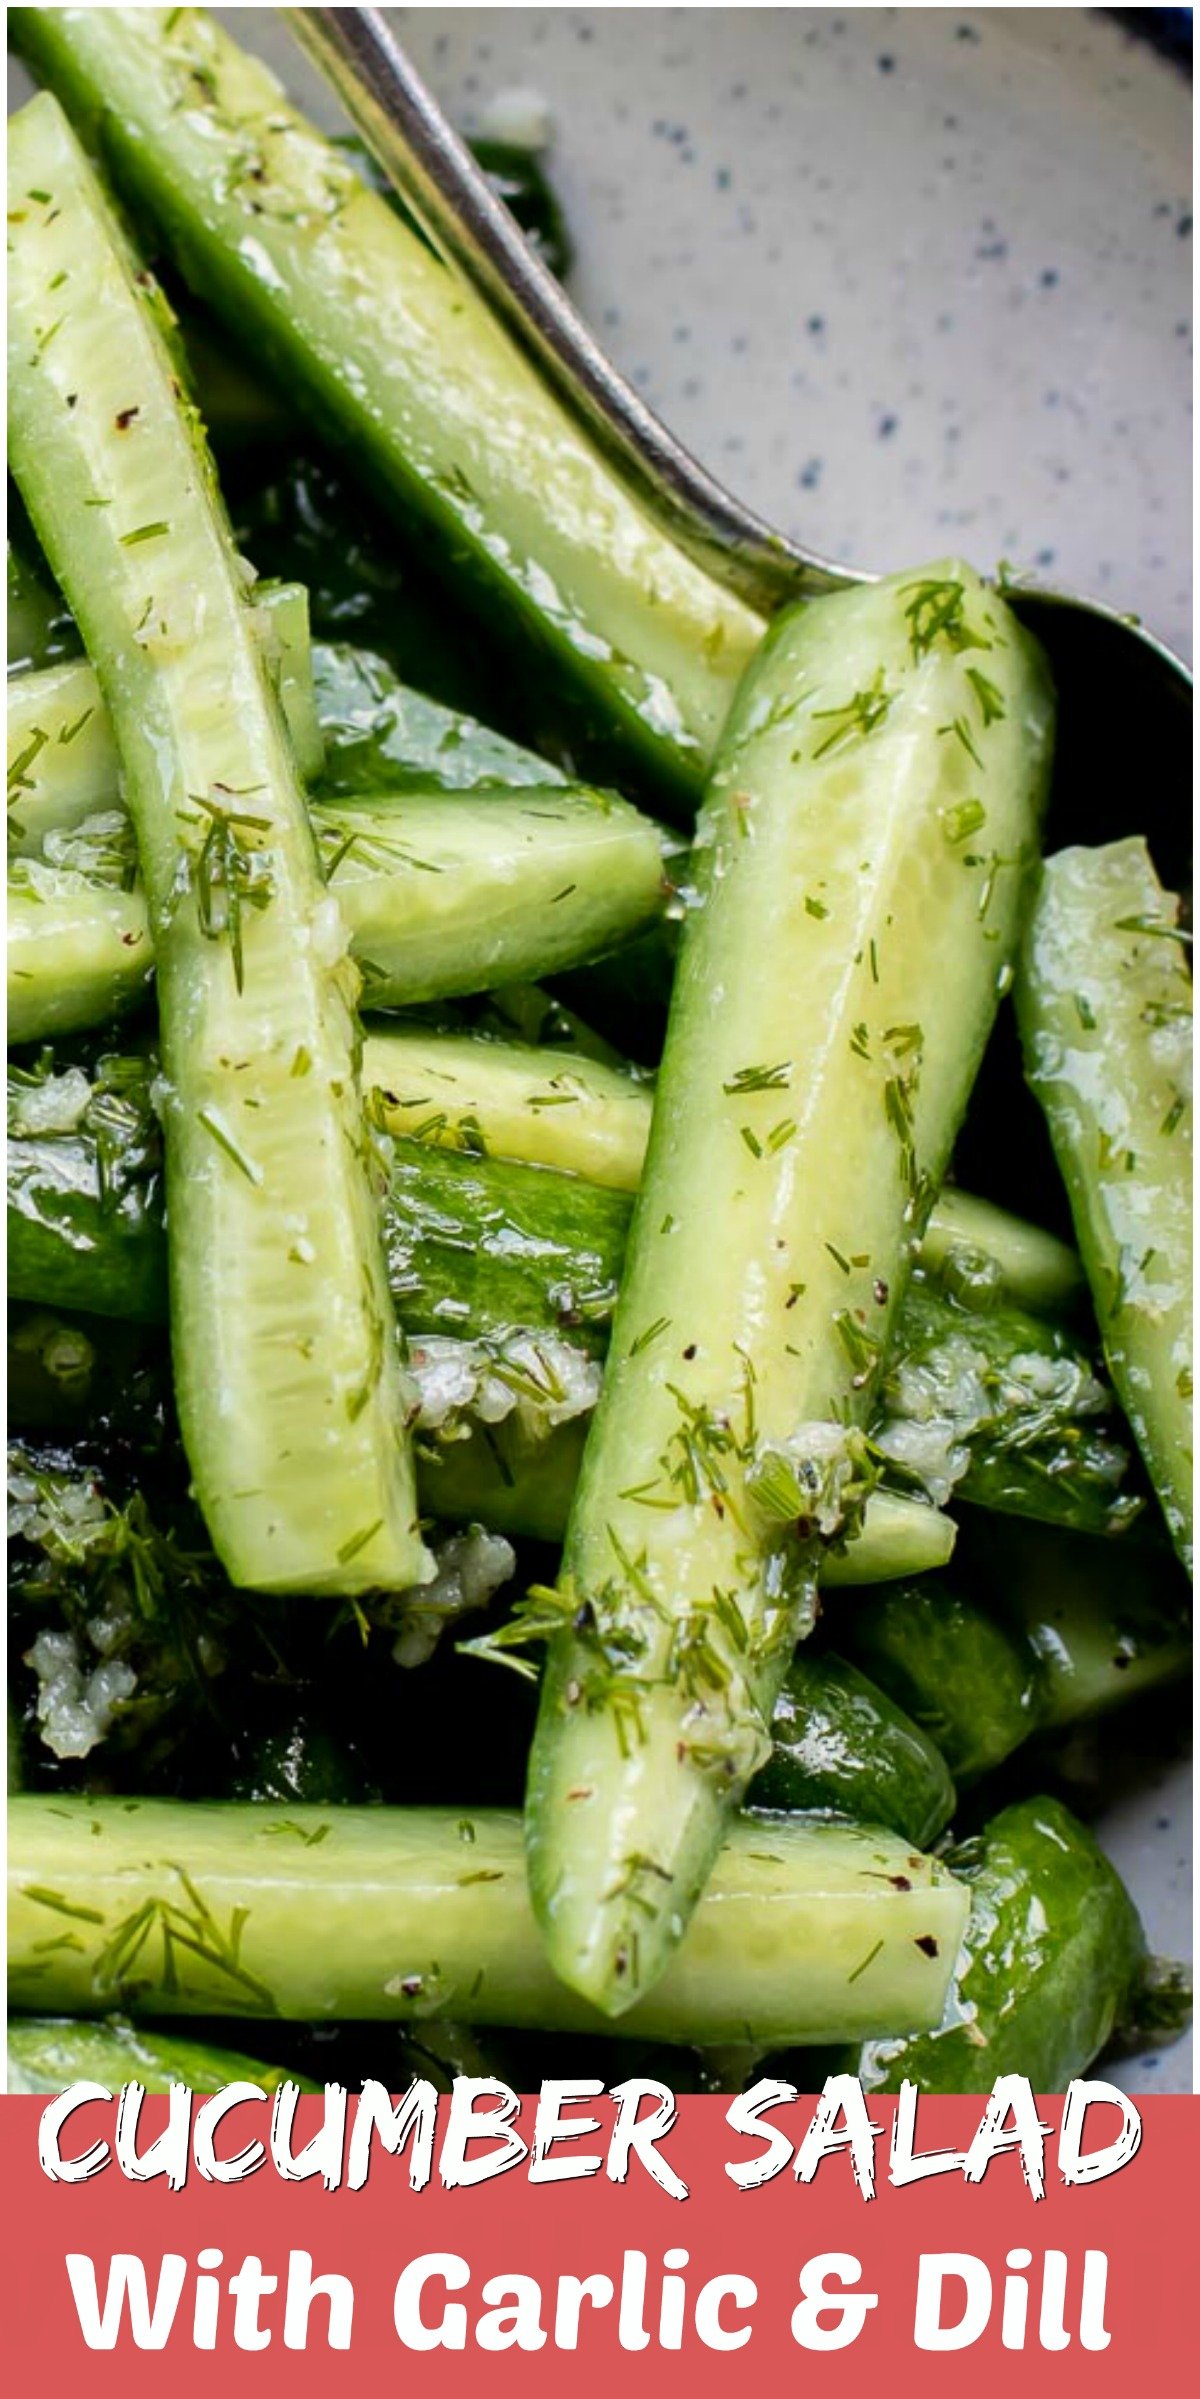 Cucumber Salad is a bite of summer in a bowl, it is fresh, crunchy and with just the right amount of kick from garlic, which makes it a perfect summer side dish. The Cucumber Dill Salad can be made ahead of time with no loss of flavor, which is a win-win in my book!